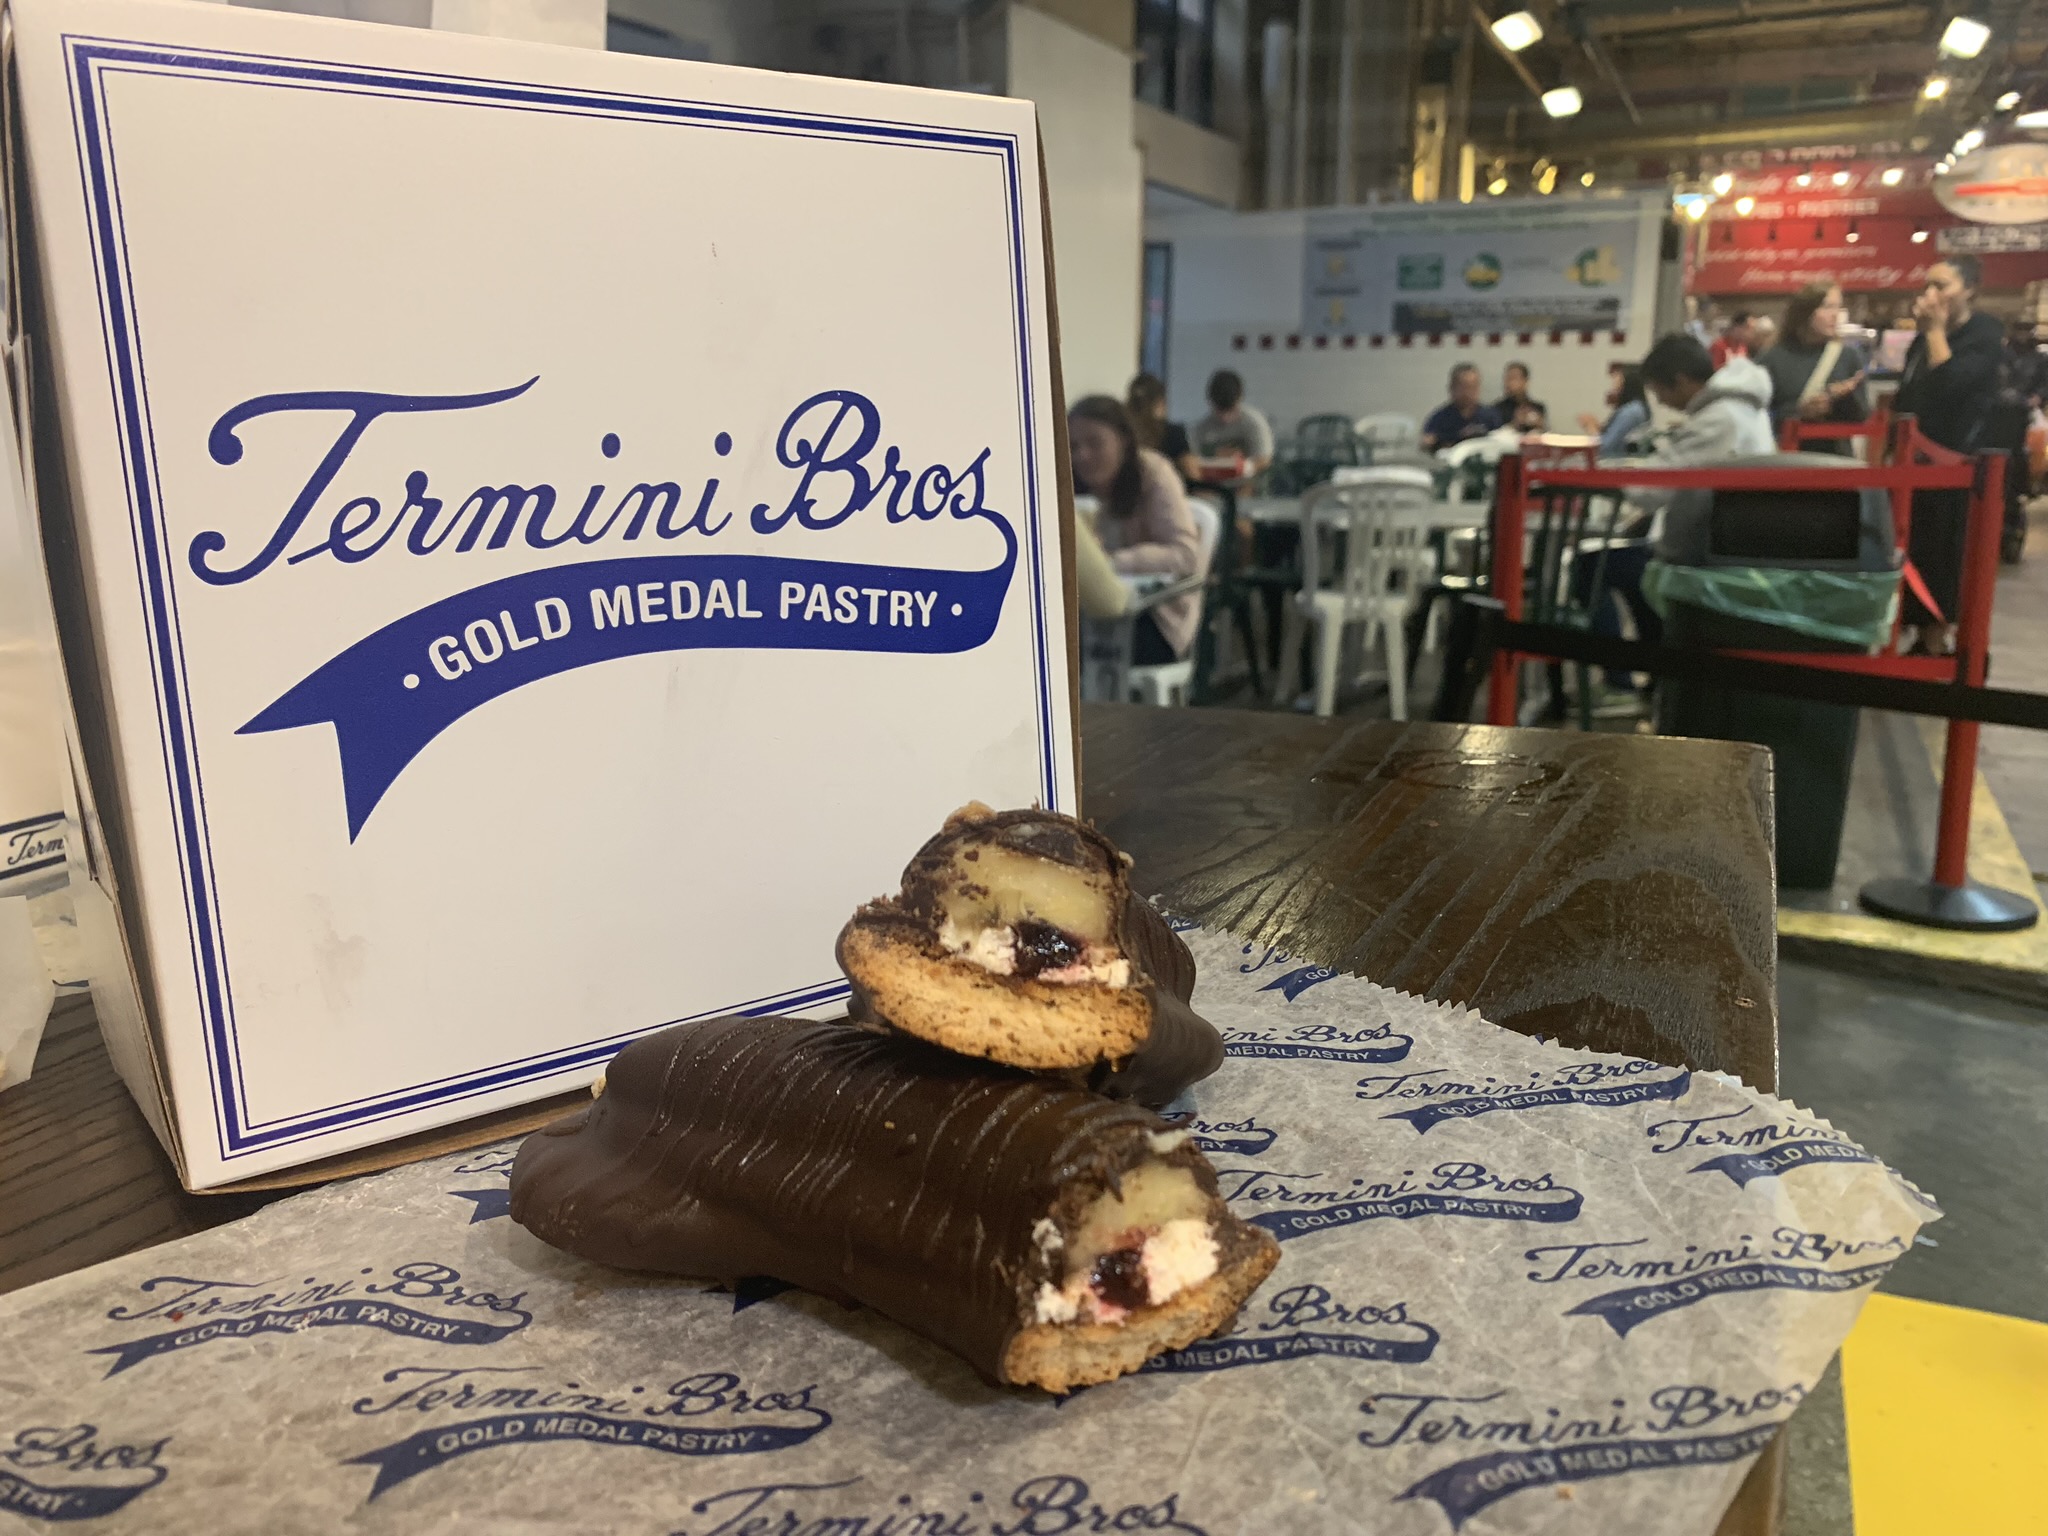 A Chocolate Banana from Termini Bros, one of our favorite dessert selection